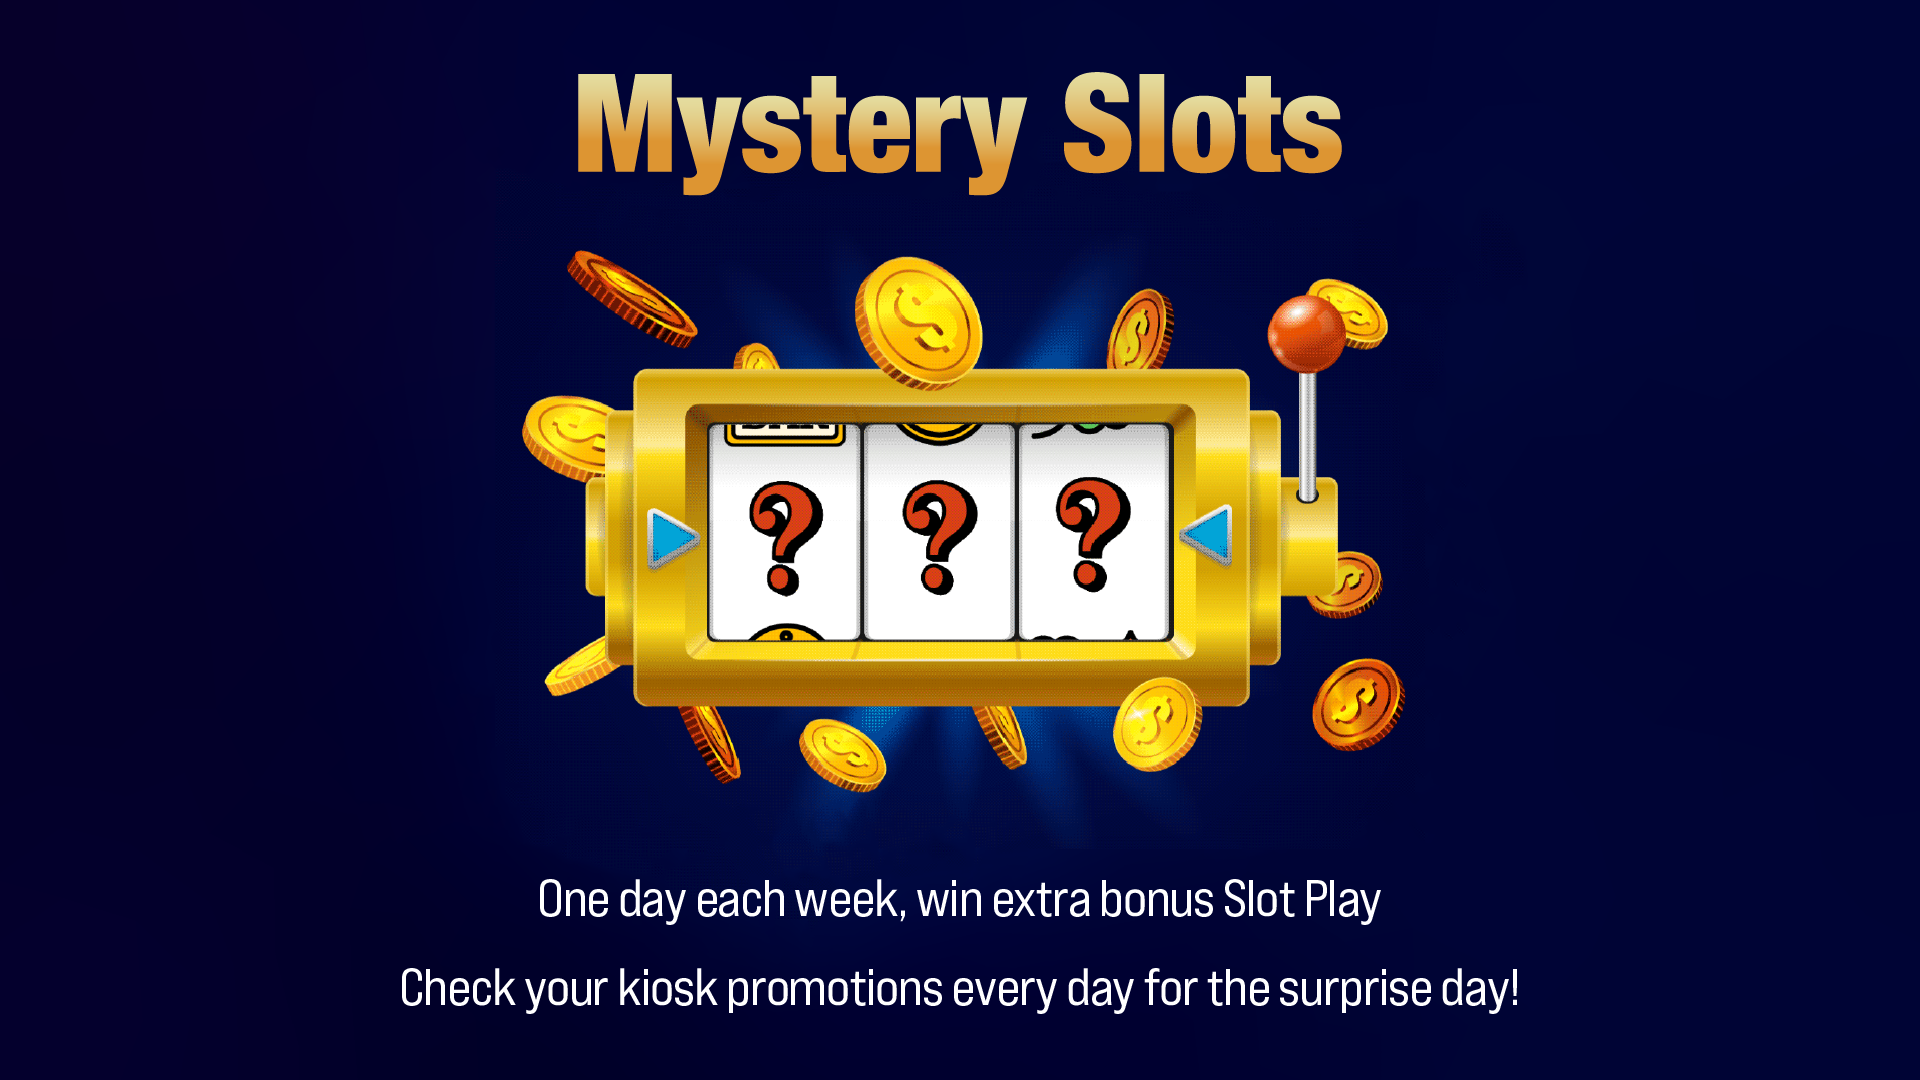 Mystery slots: One day each week, win extra bonus slot play. Check your kiosk promotions every day for the surprise day!